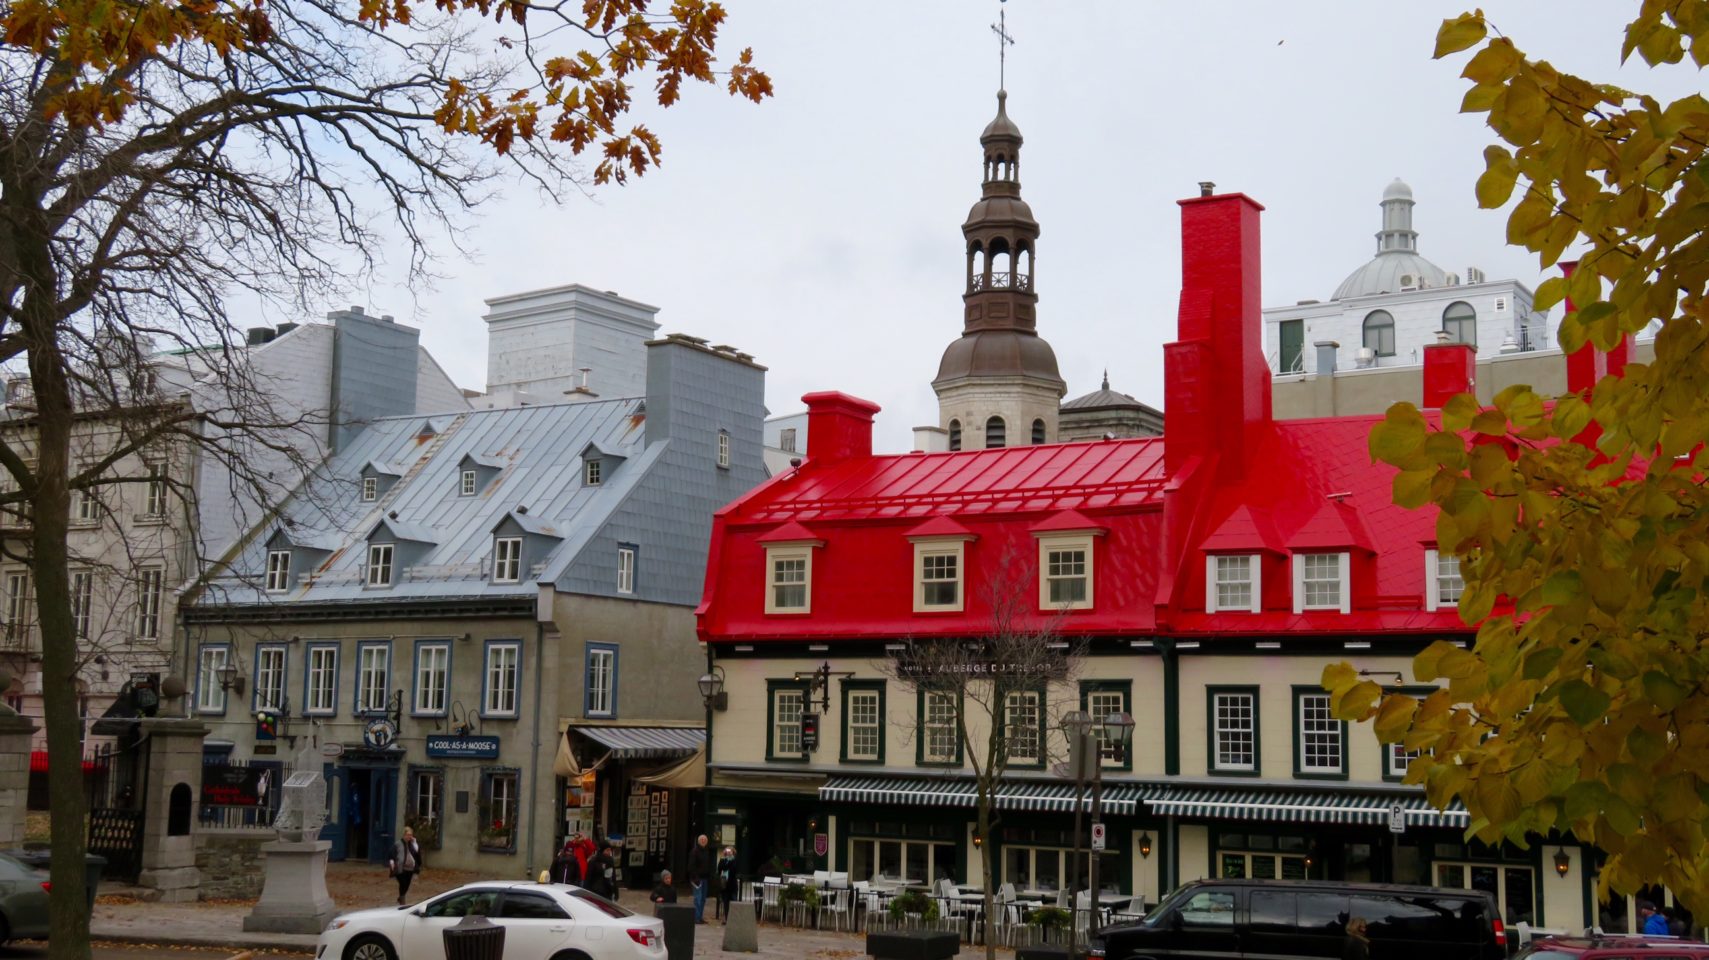 The charming old city of Quebec